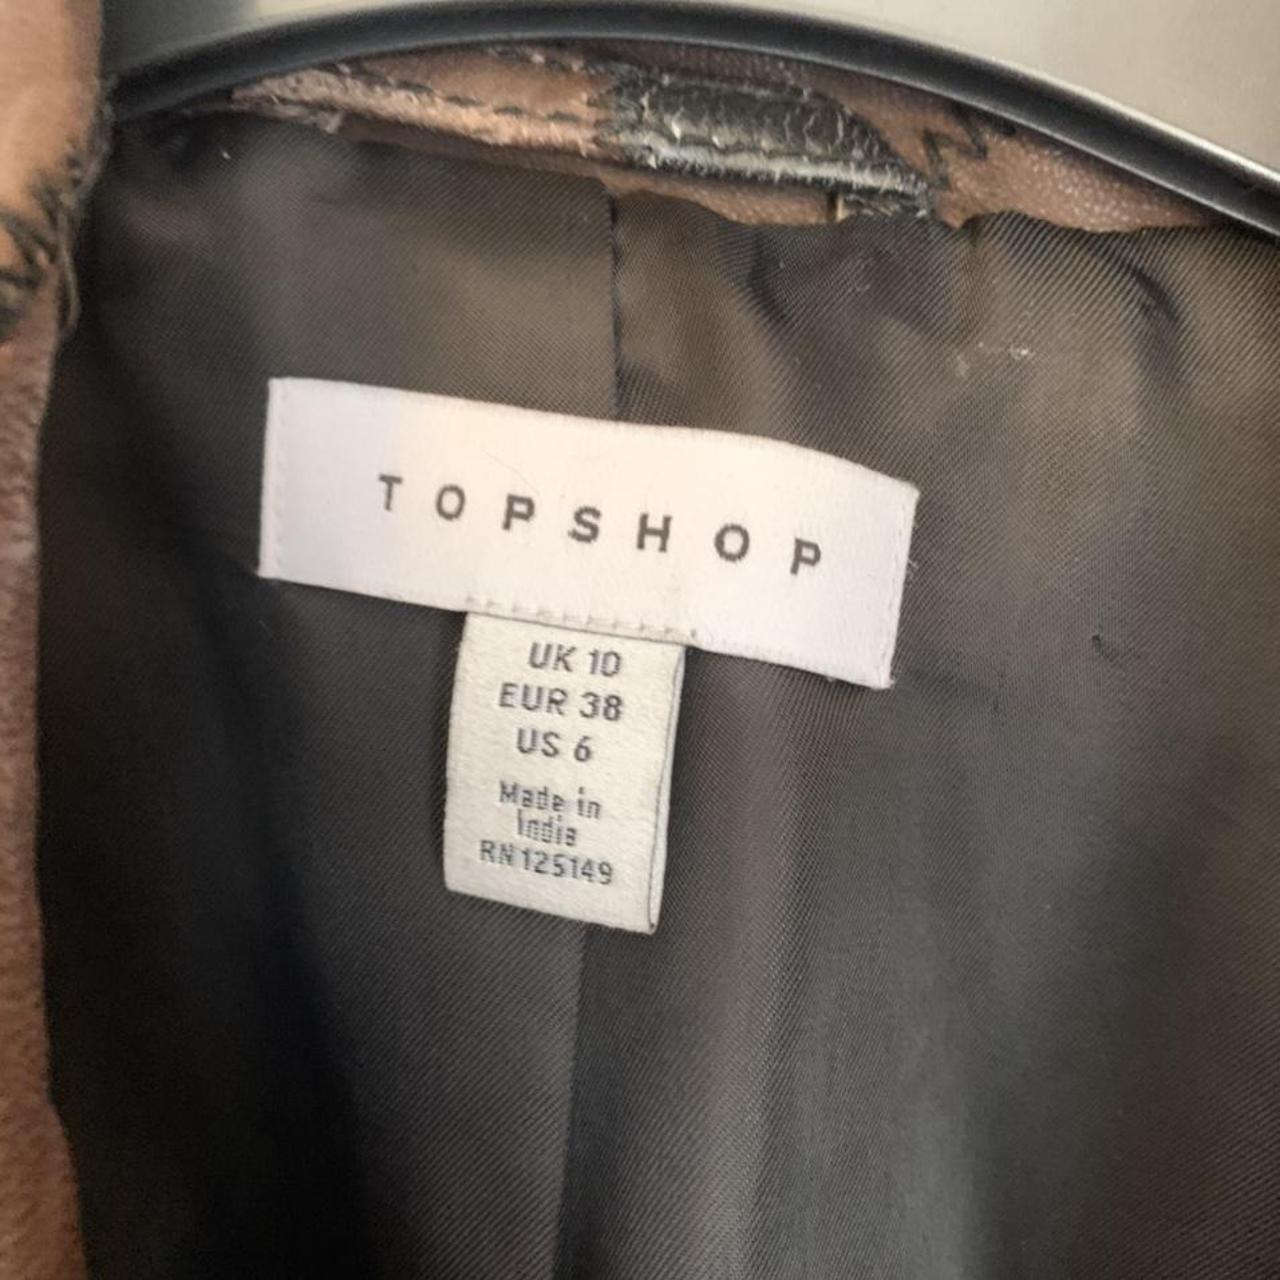 Topshop iconic patchwork oversized real leather... - Depop